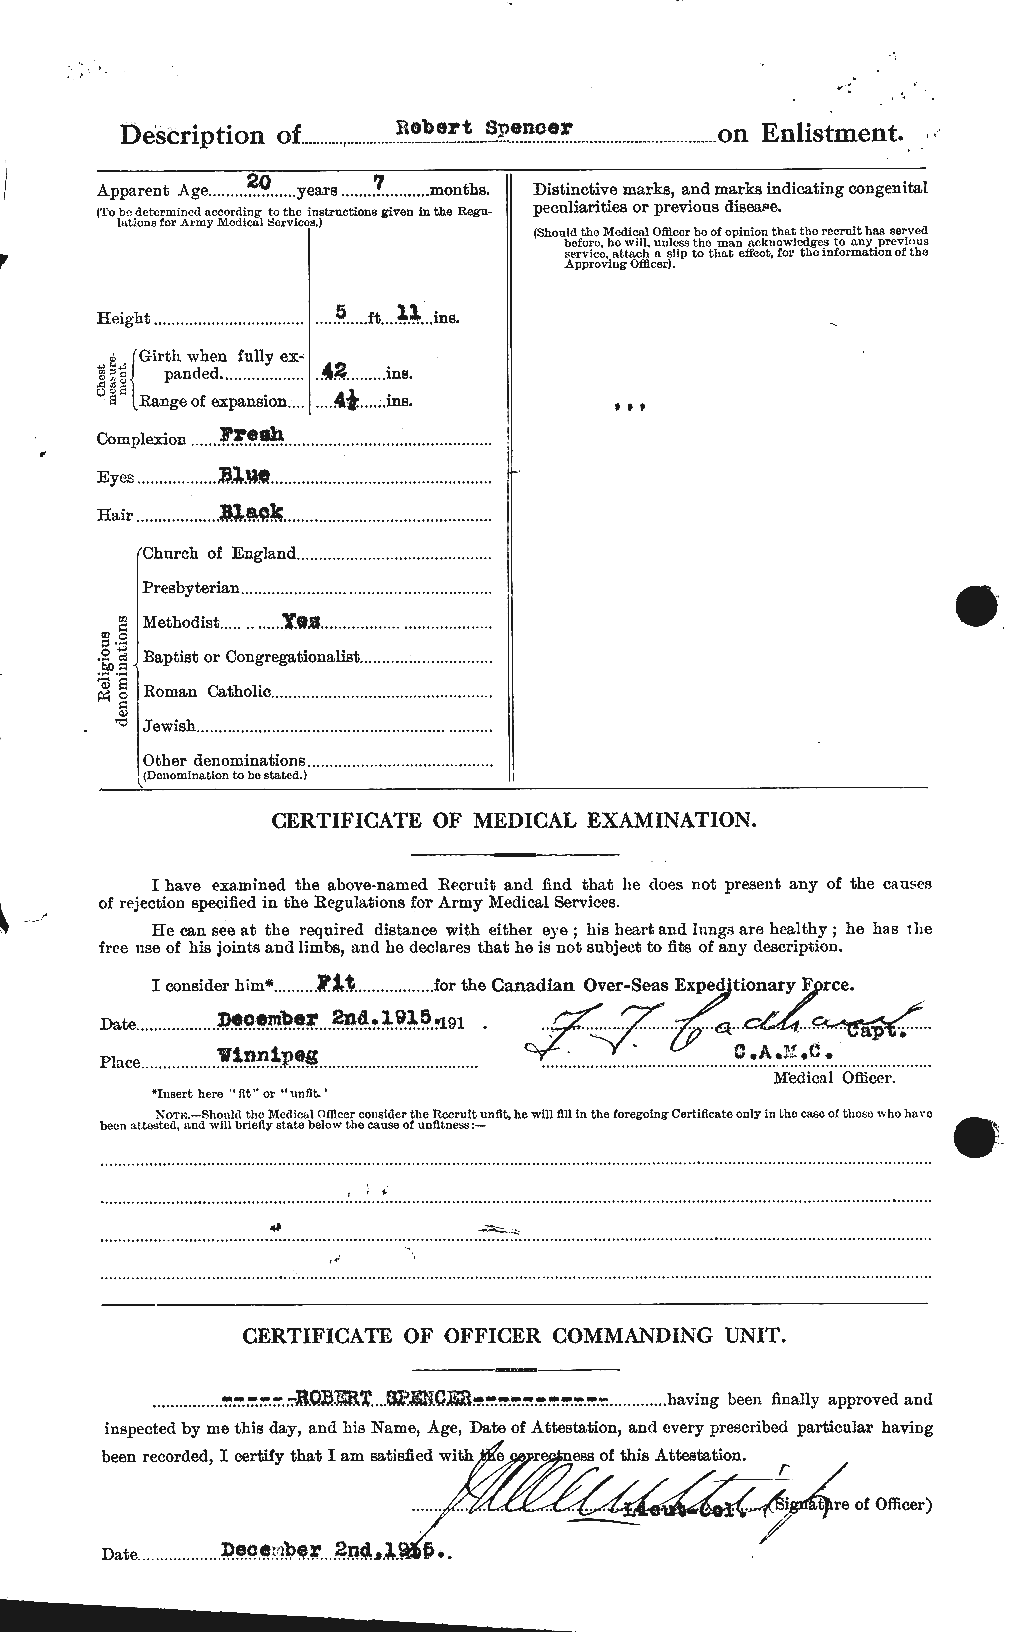 Personnel Records of the First World War - CEF 619927b